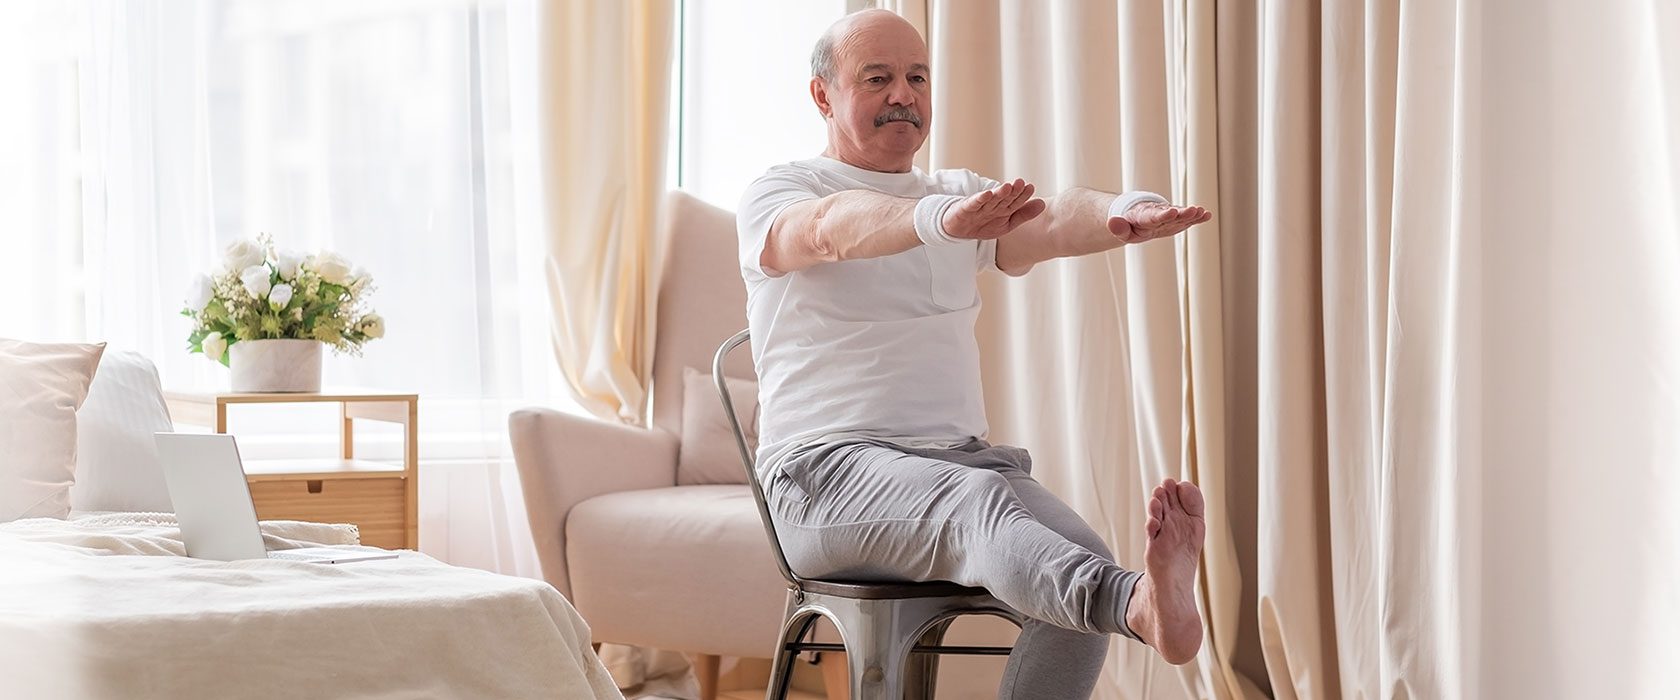 Arm Chair Yoga For Older Adults: Get Fit While You Sit! - Assisted Living  Services, Inc.